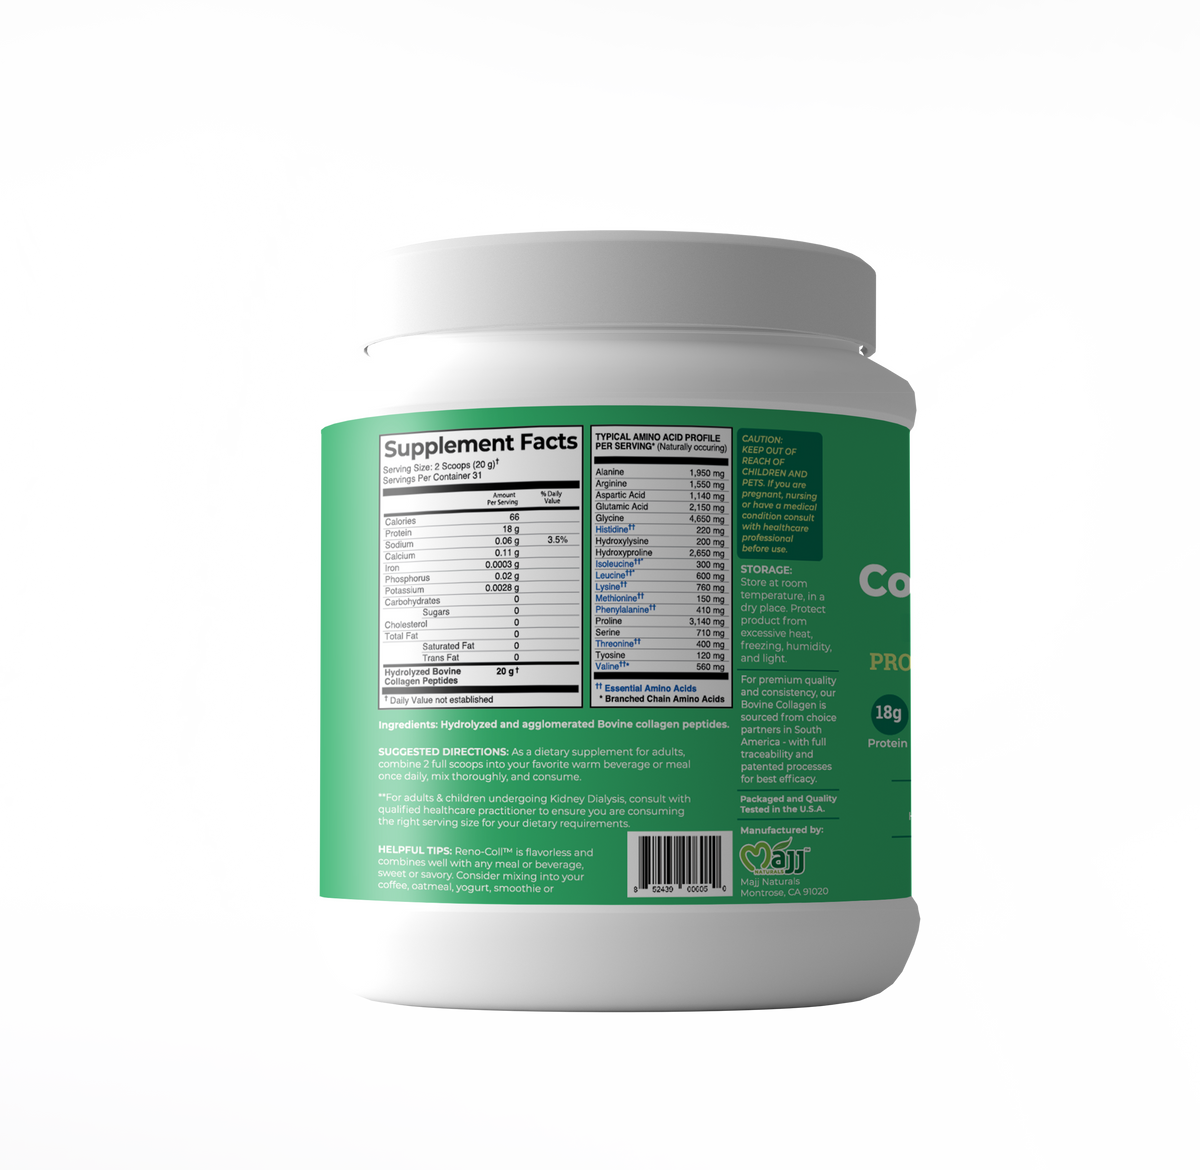 Reno-Coll Collagen product label showing Supplement Facts and Amino Acid table.